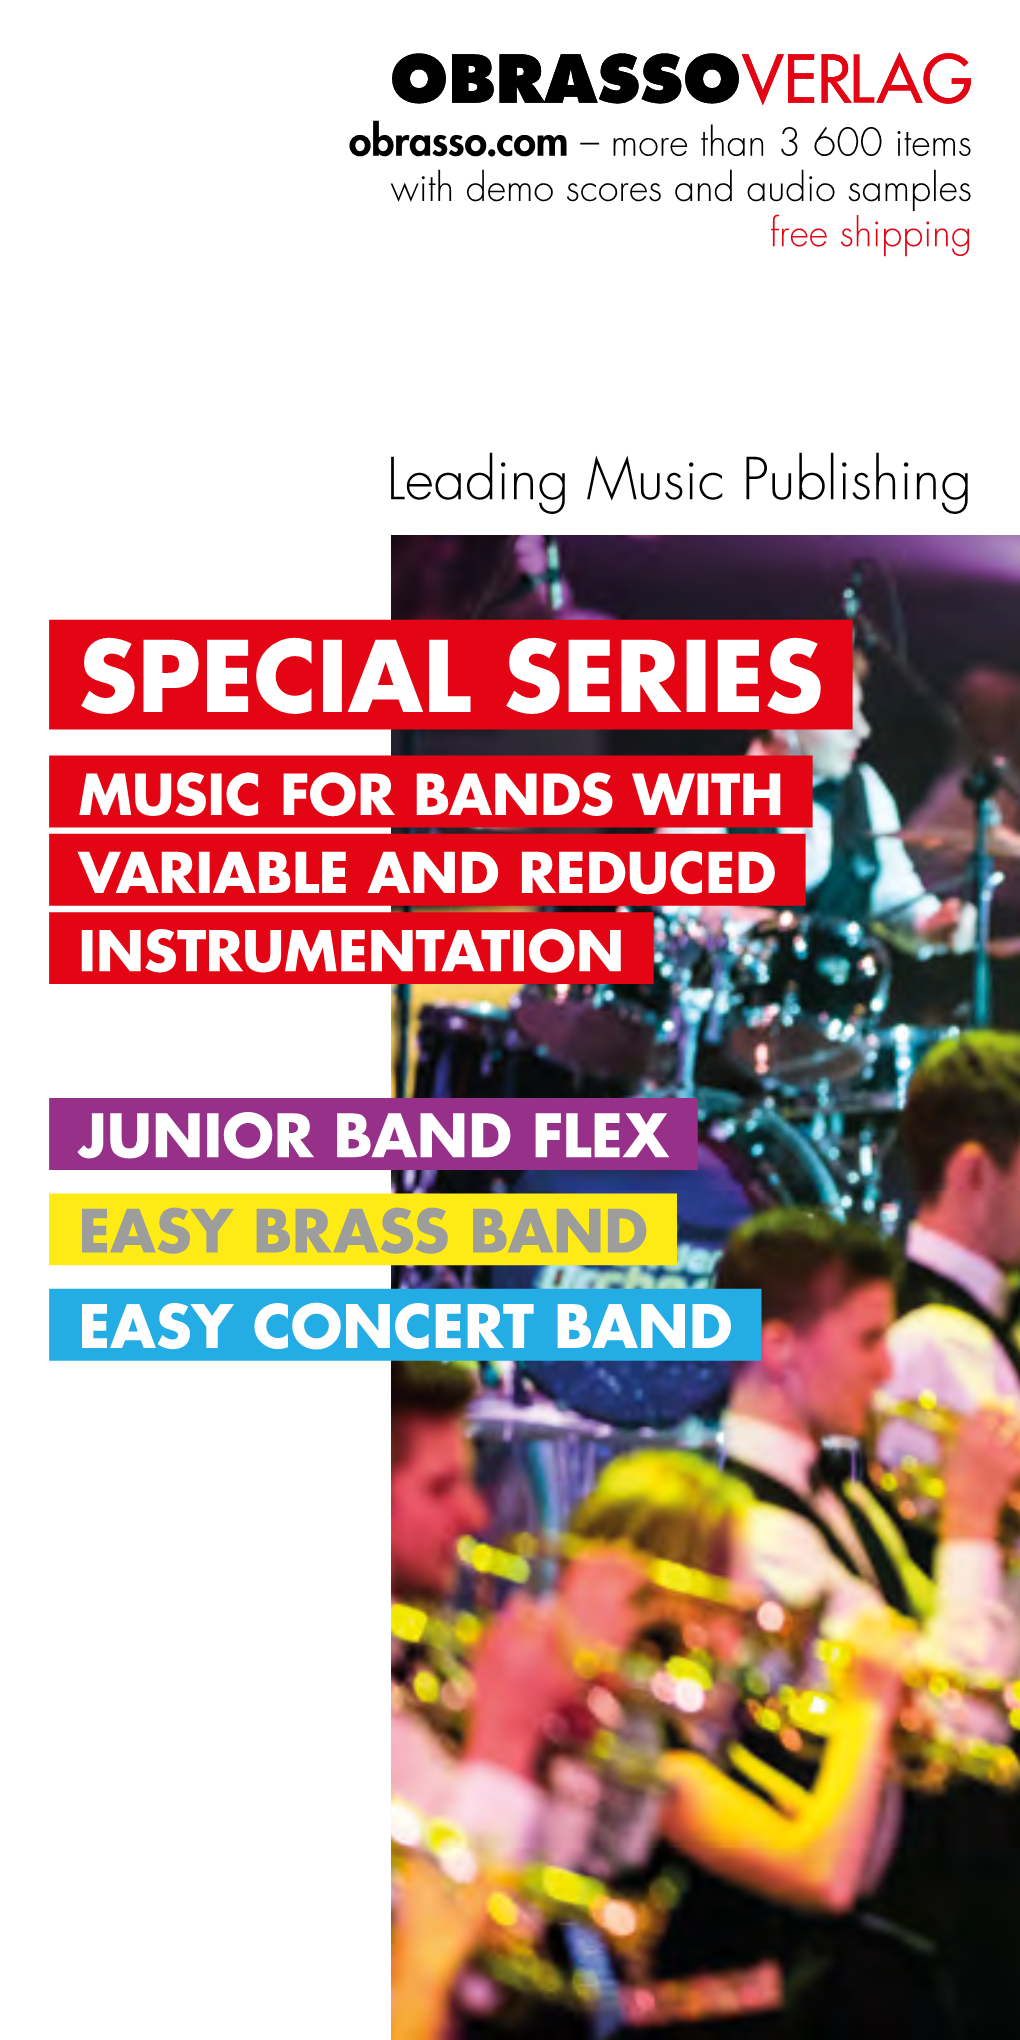 Special Series Music for Bands with Variable and Reduced Instrumentation